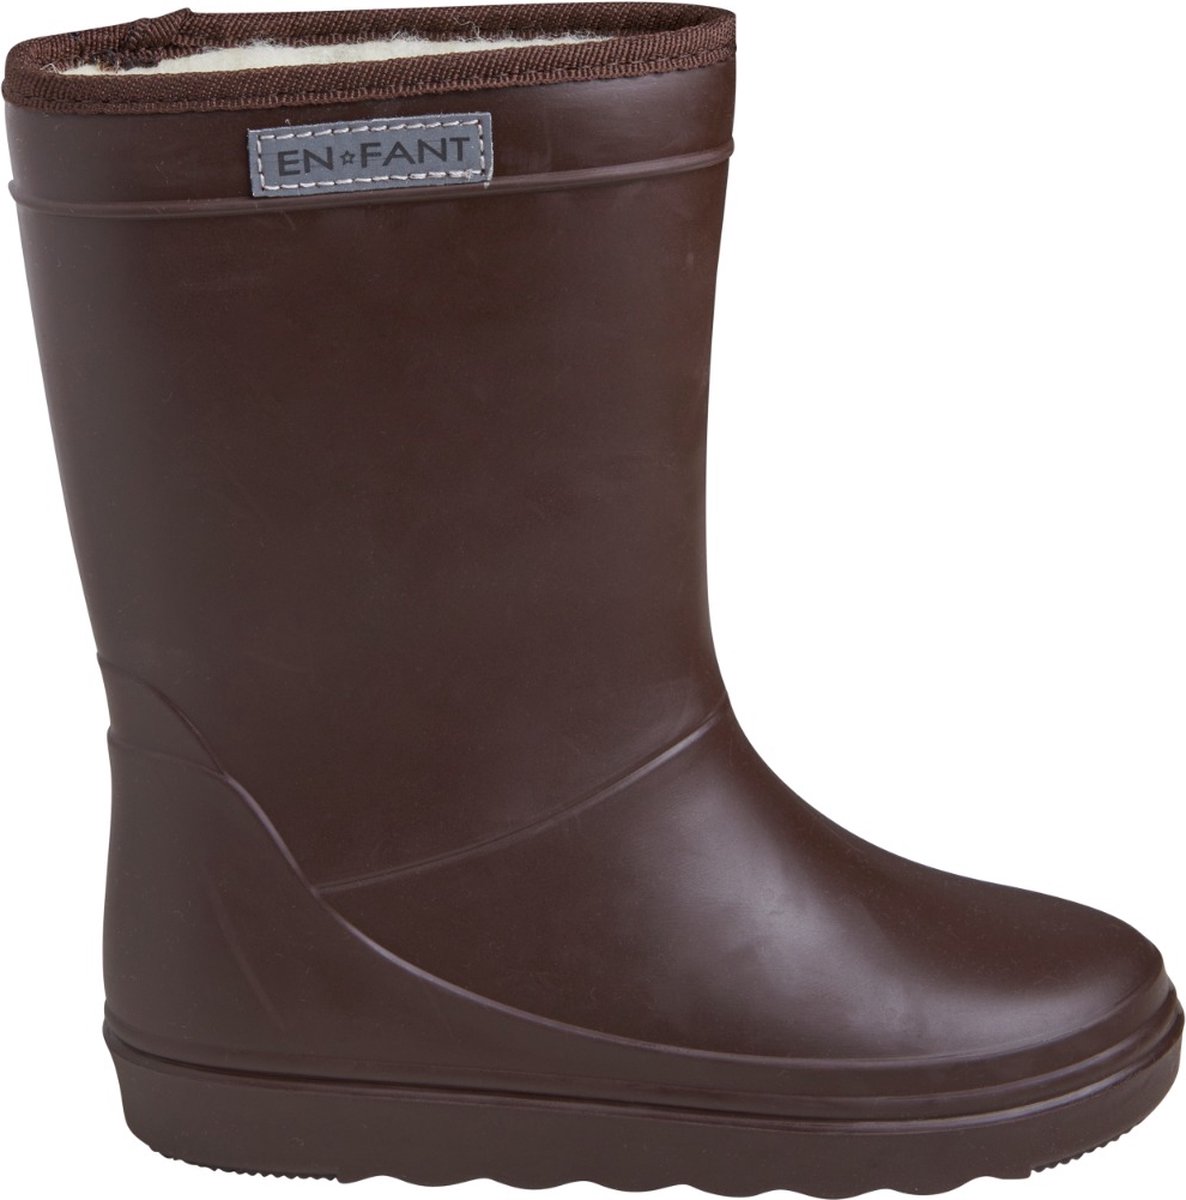 ENFANT THERMOBOOTS COFFEE BEAN-32